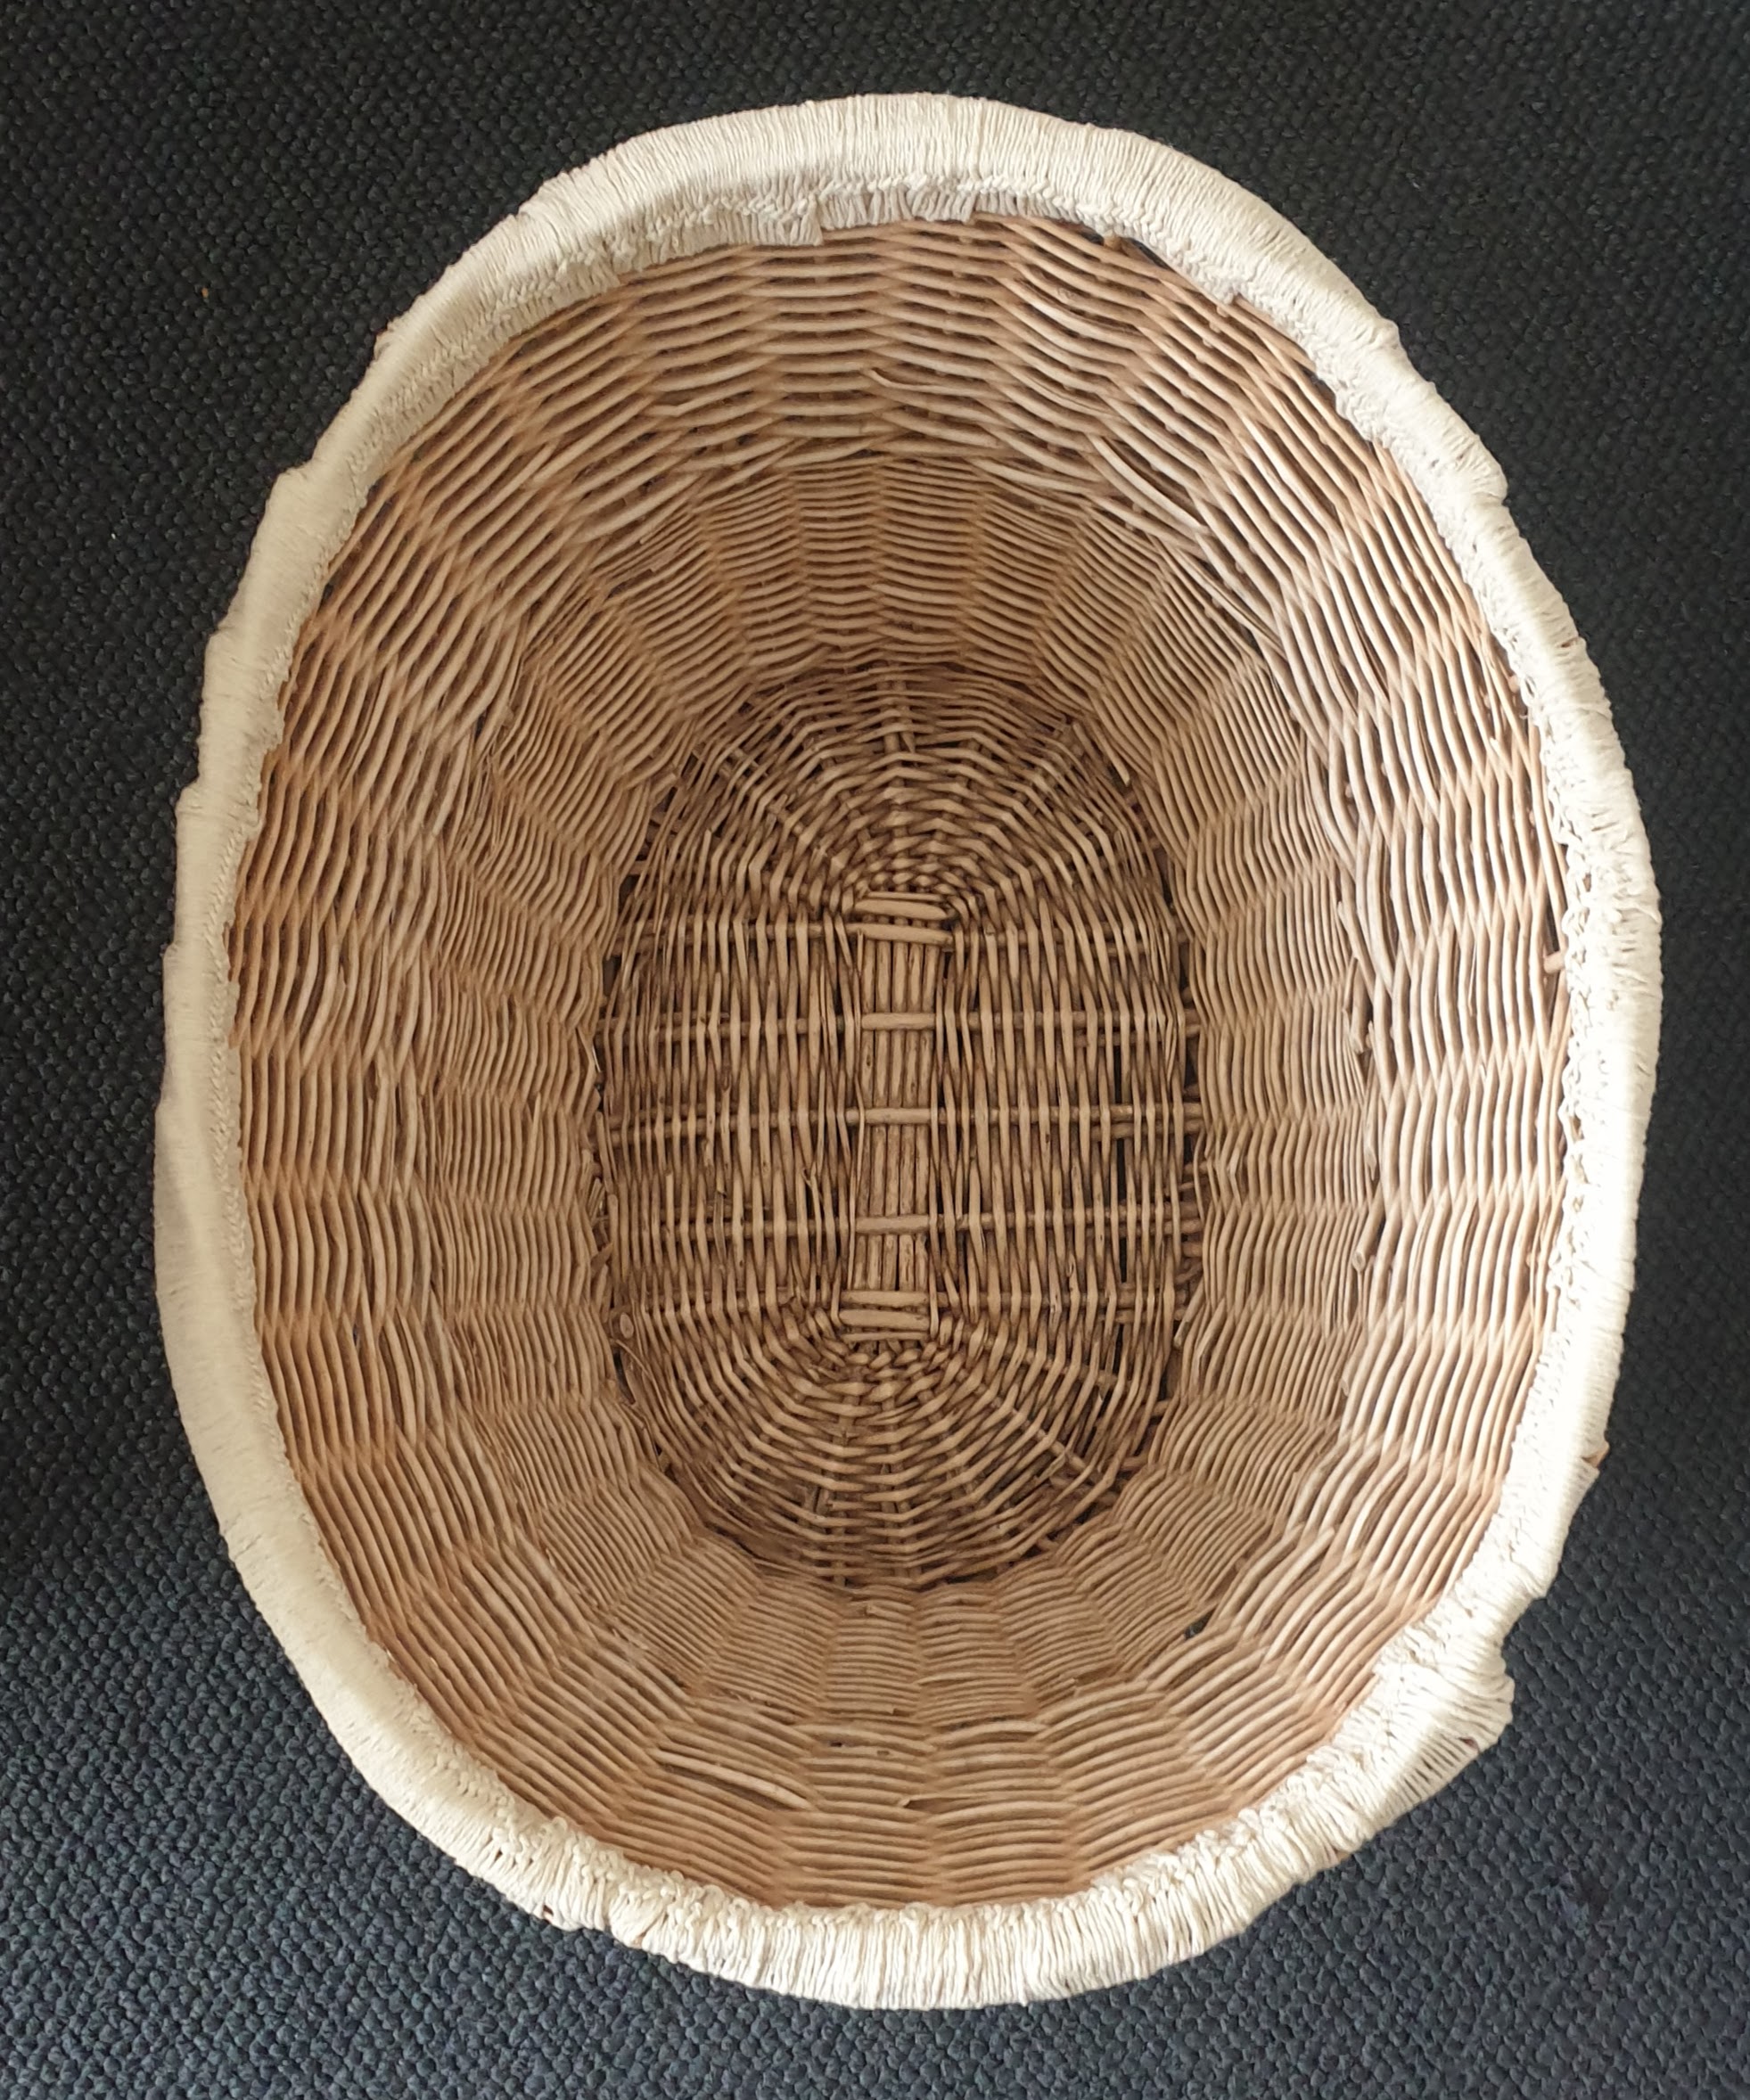 Top-down view of a wicker basket with crochet edging completed in a tan colour. There are no visible handles.